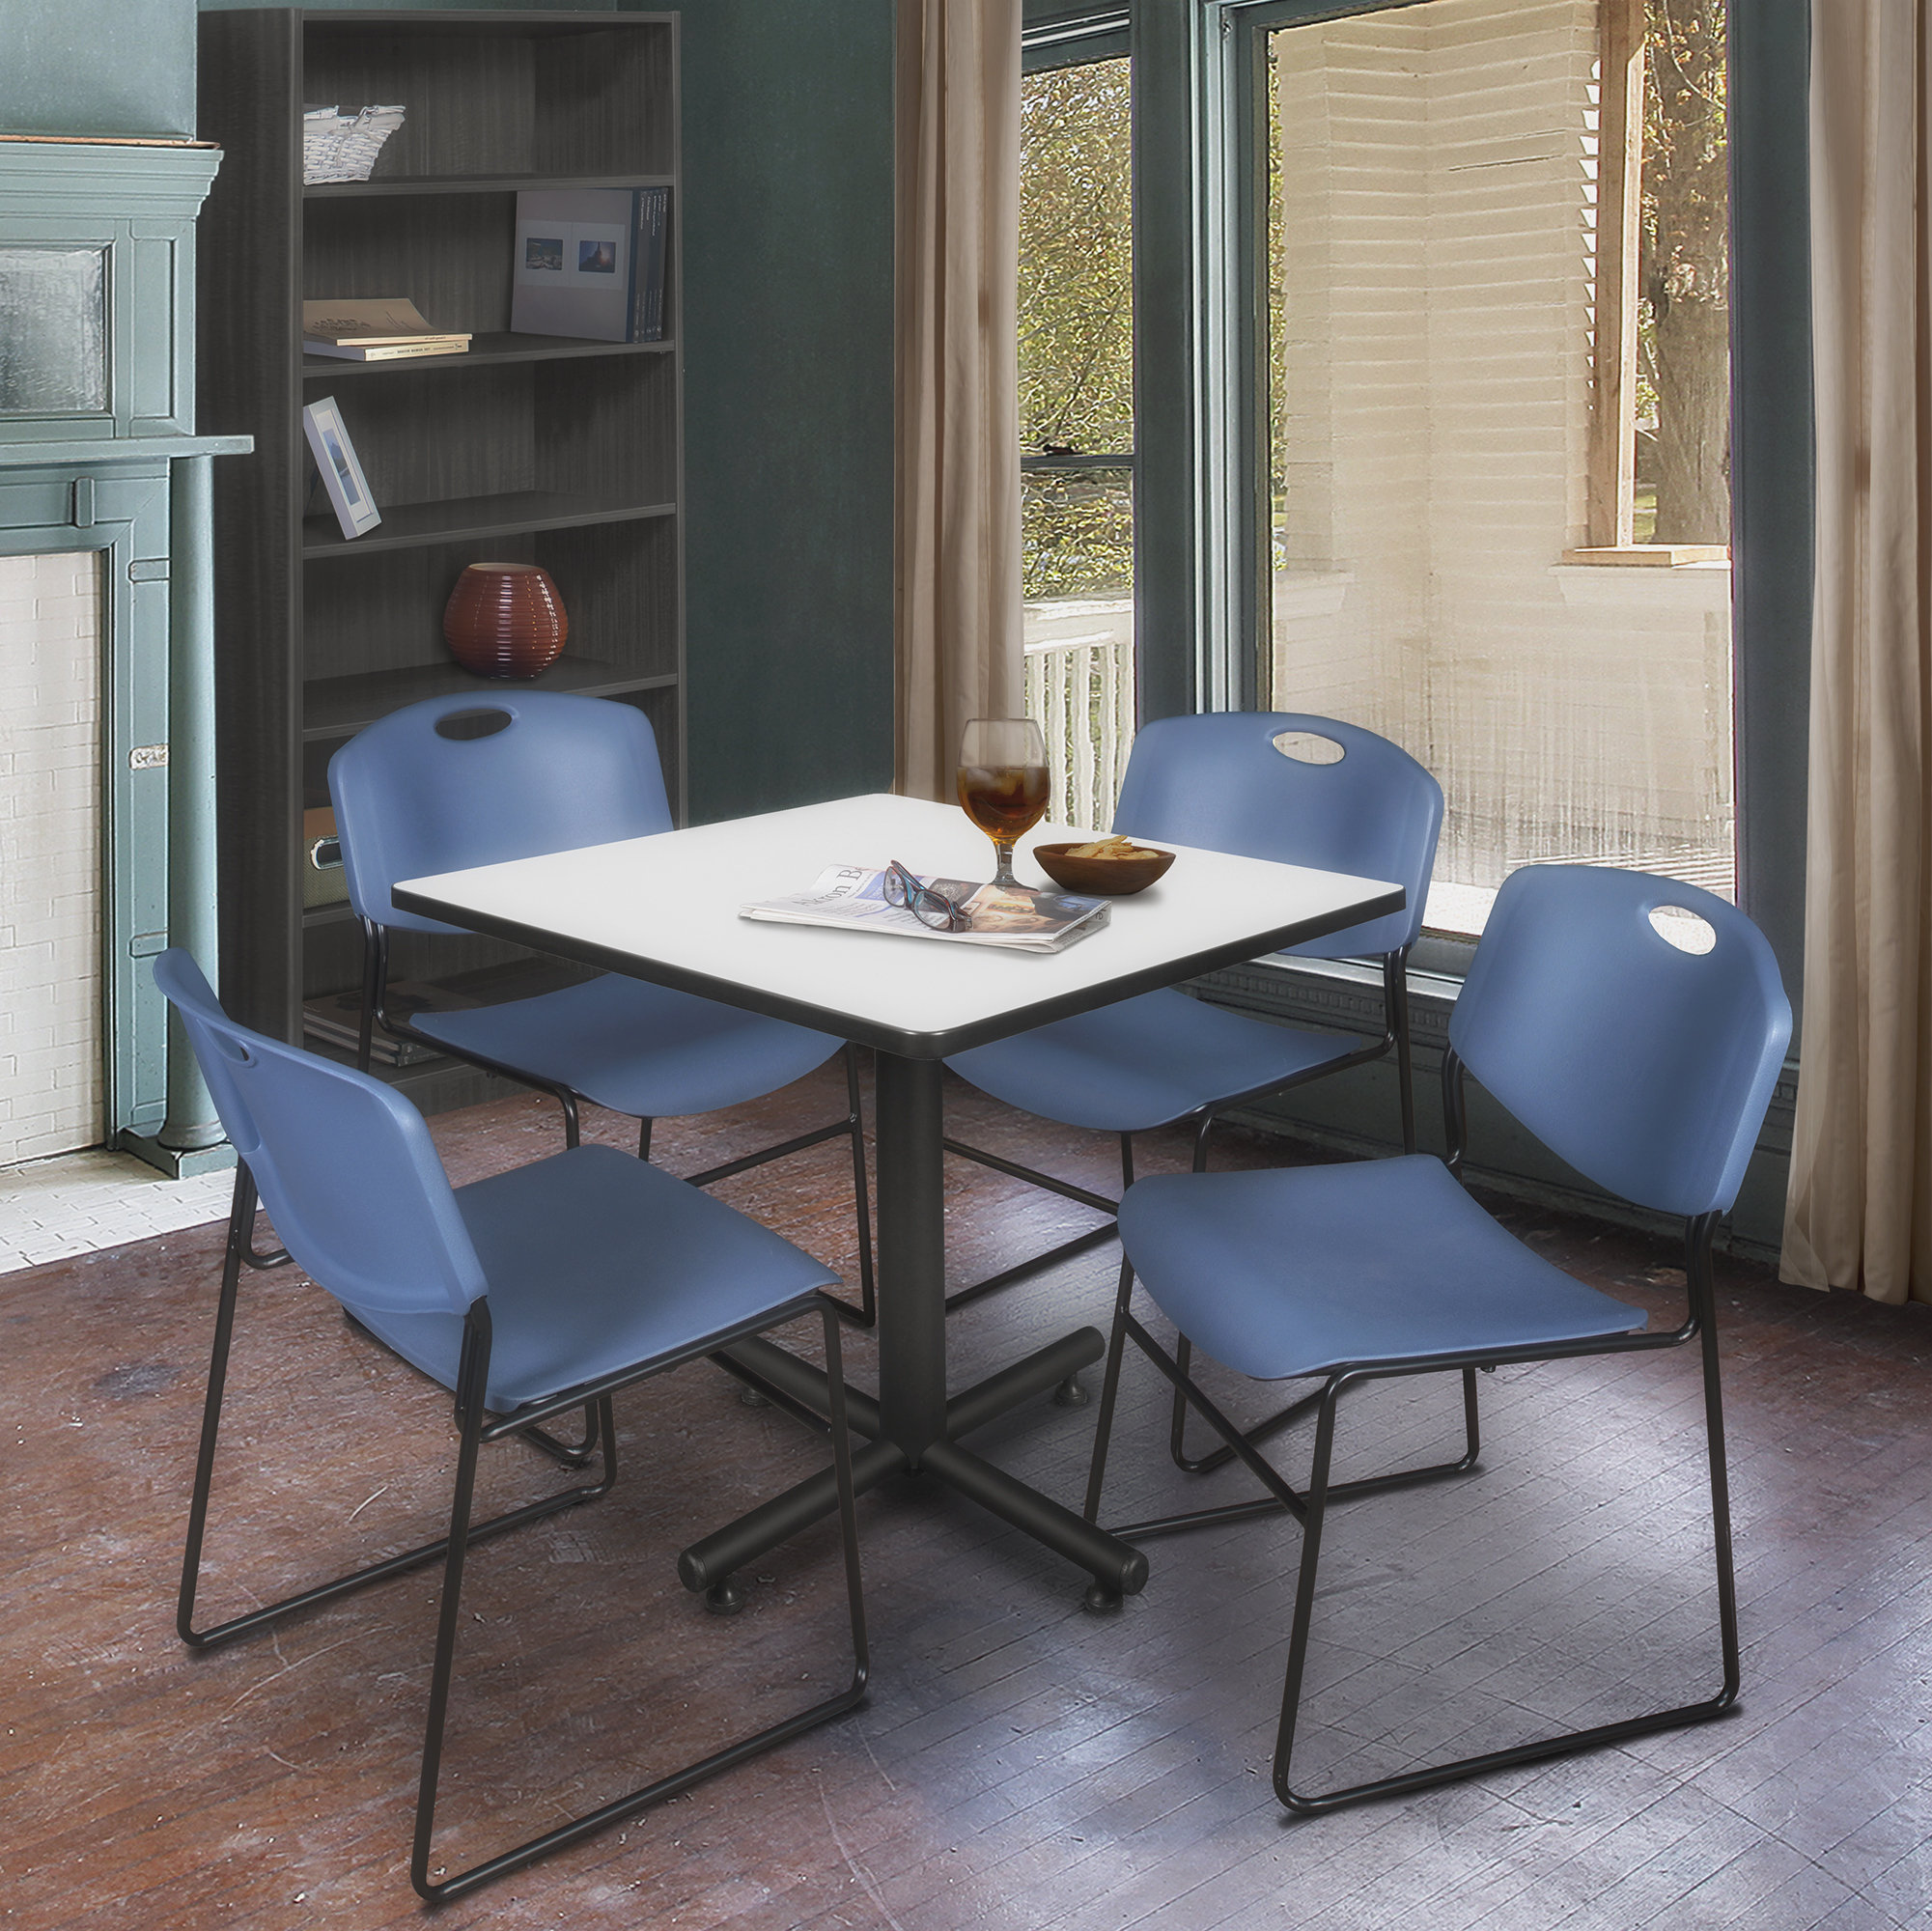 Regency Cain Square Breakroom Table with 4 Stackable Restaurant Chairs 